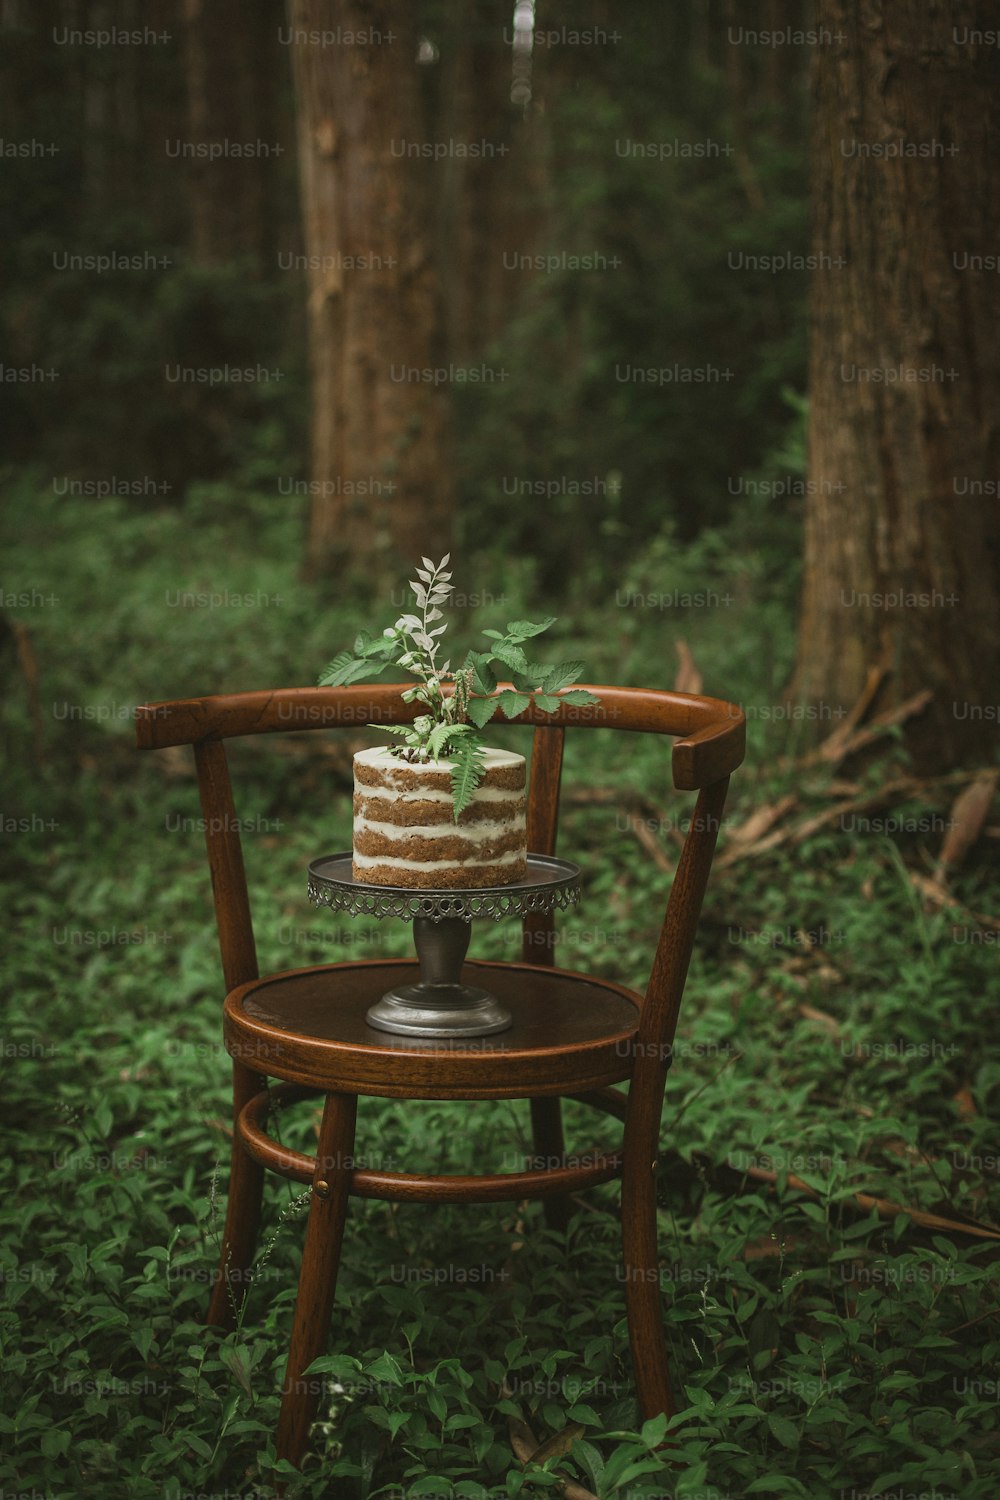 a cake sitting on top of a wooden chair in a forest